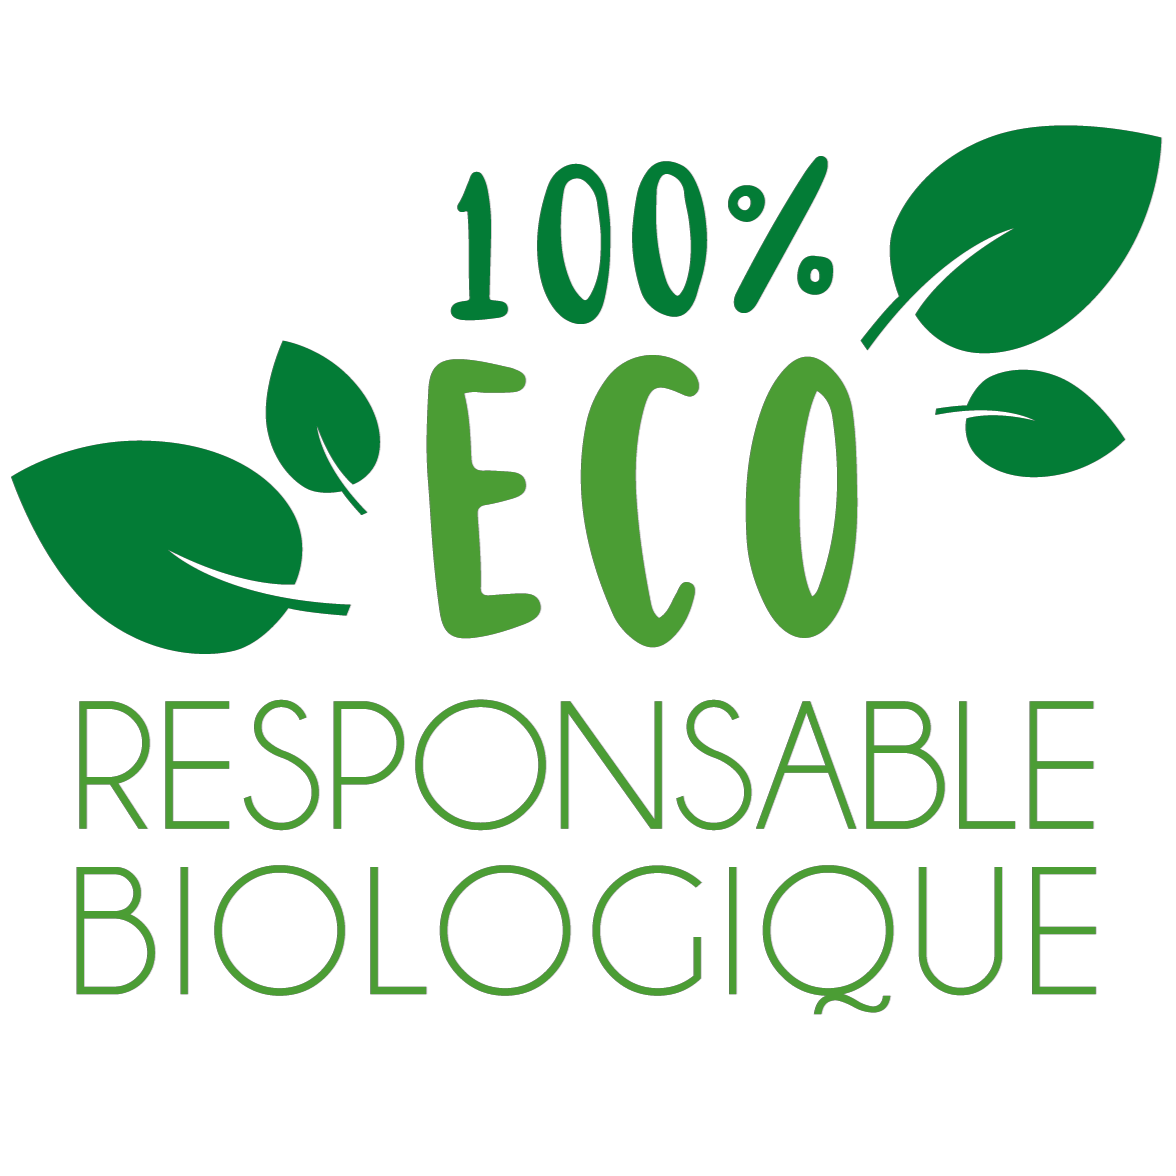 100 ECO RESPONSABLE.png